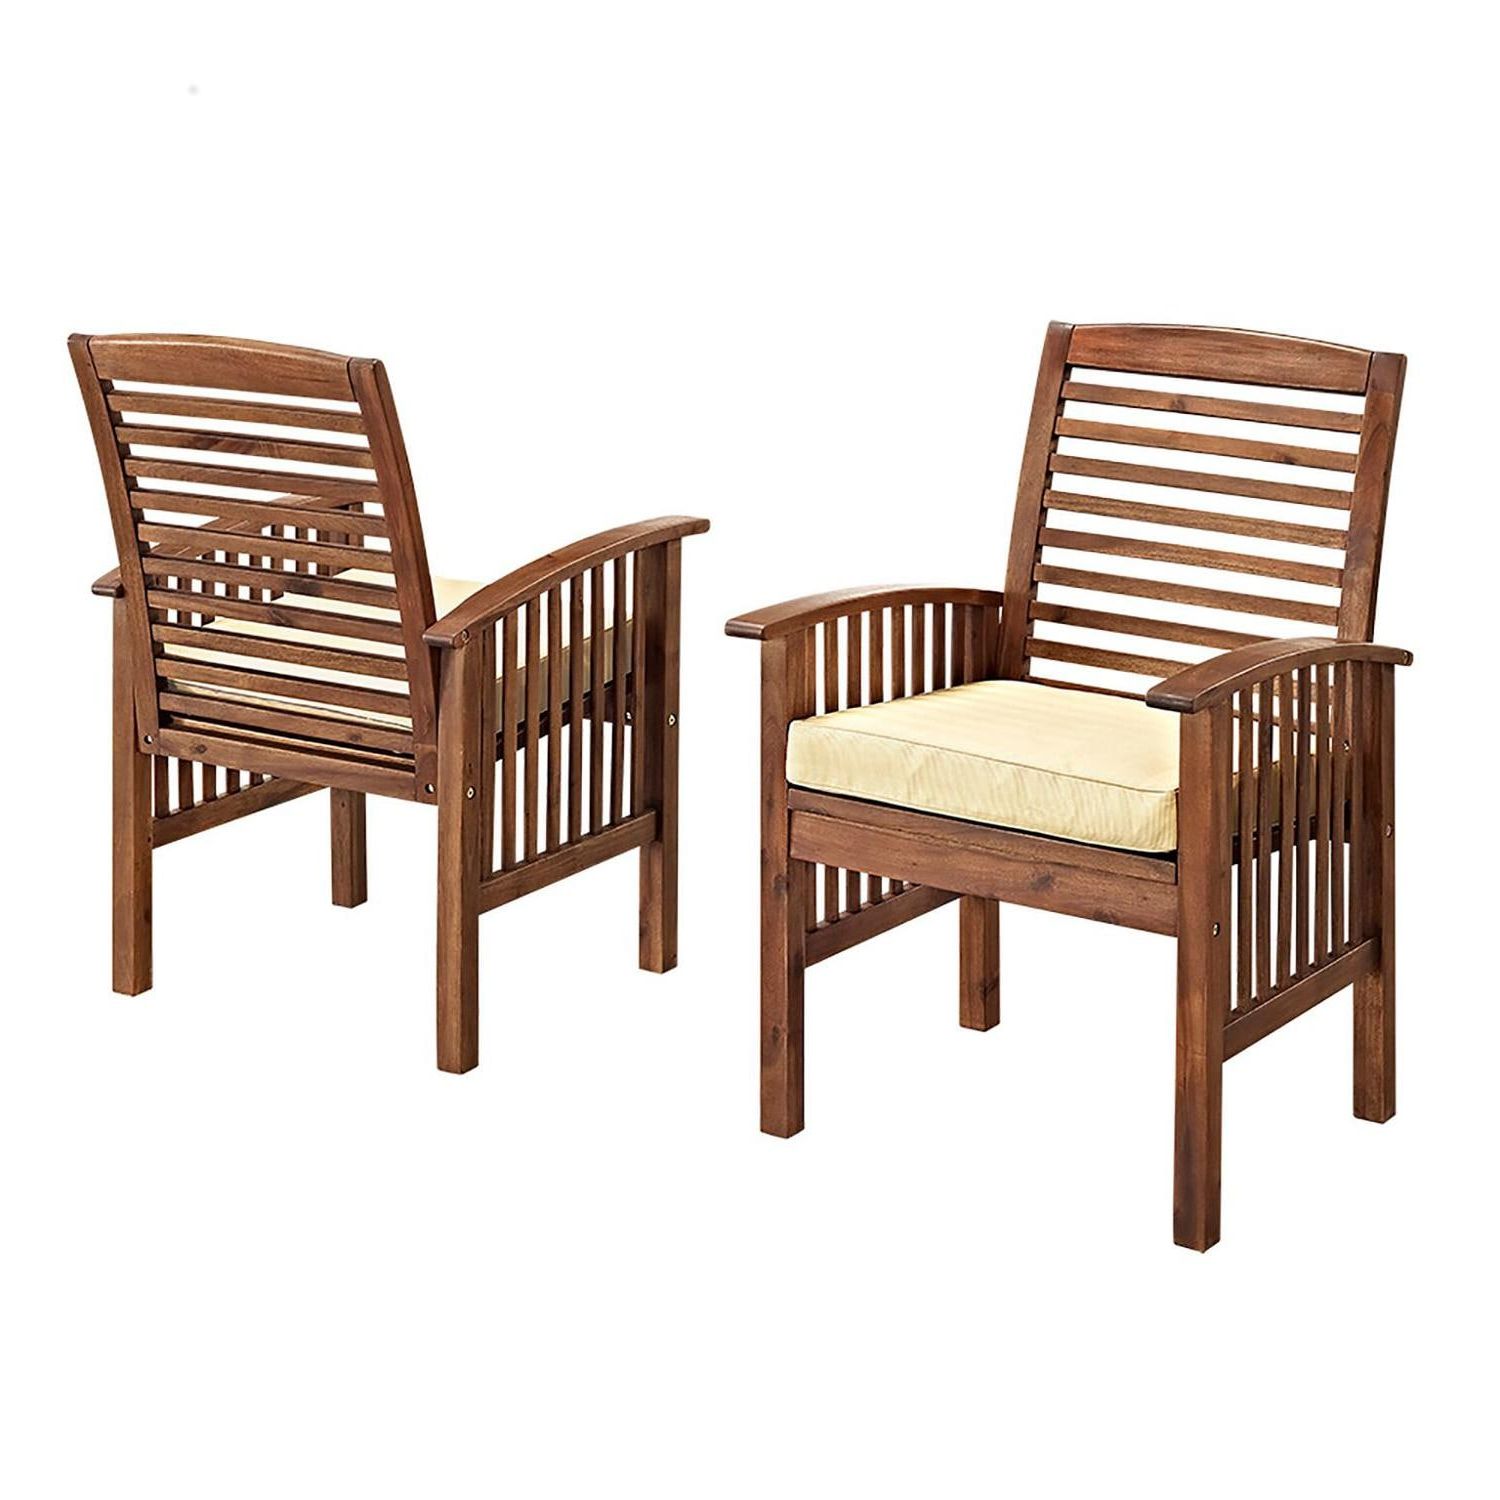 Midland 6 Piece Dark Brown Acacia Patio Dining Set W/ 55 X 35 Inch Throughout Fashionable Brown Acacia Patio Chairs With Cushions (View 3 of 15)